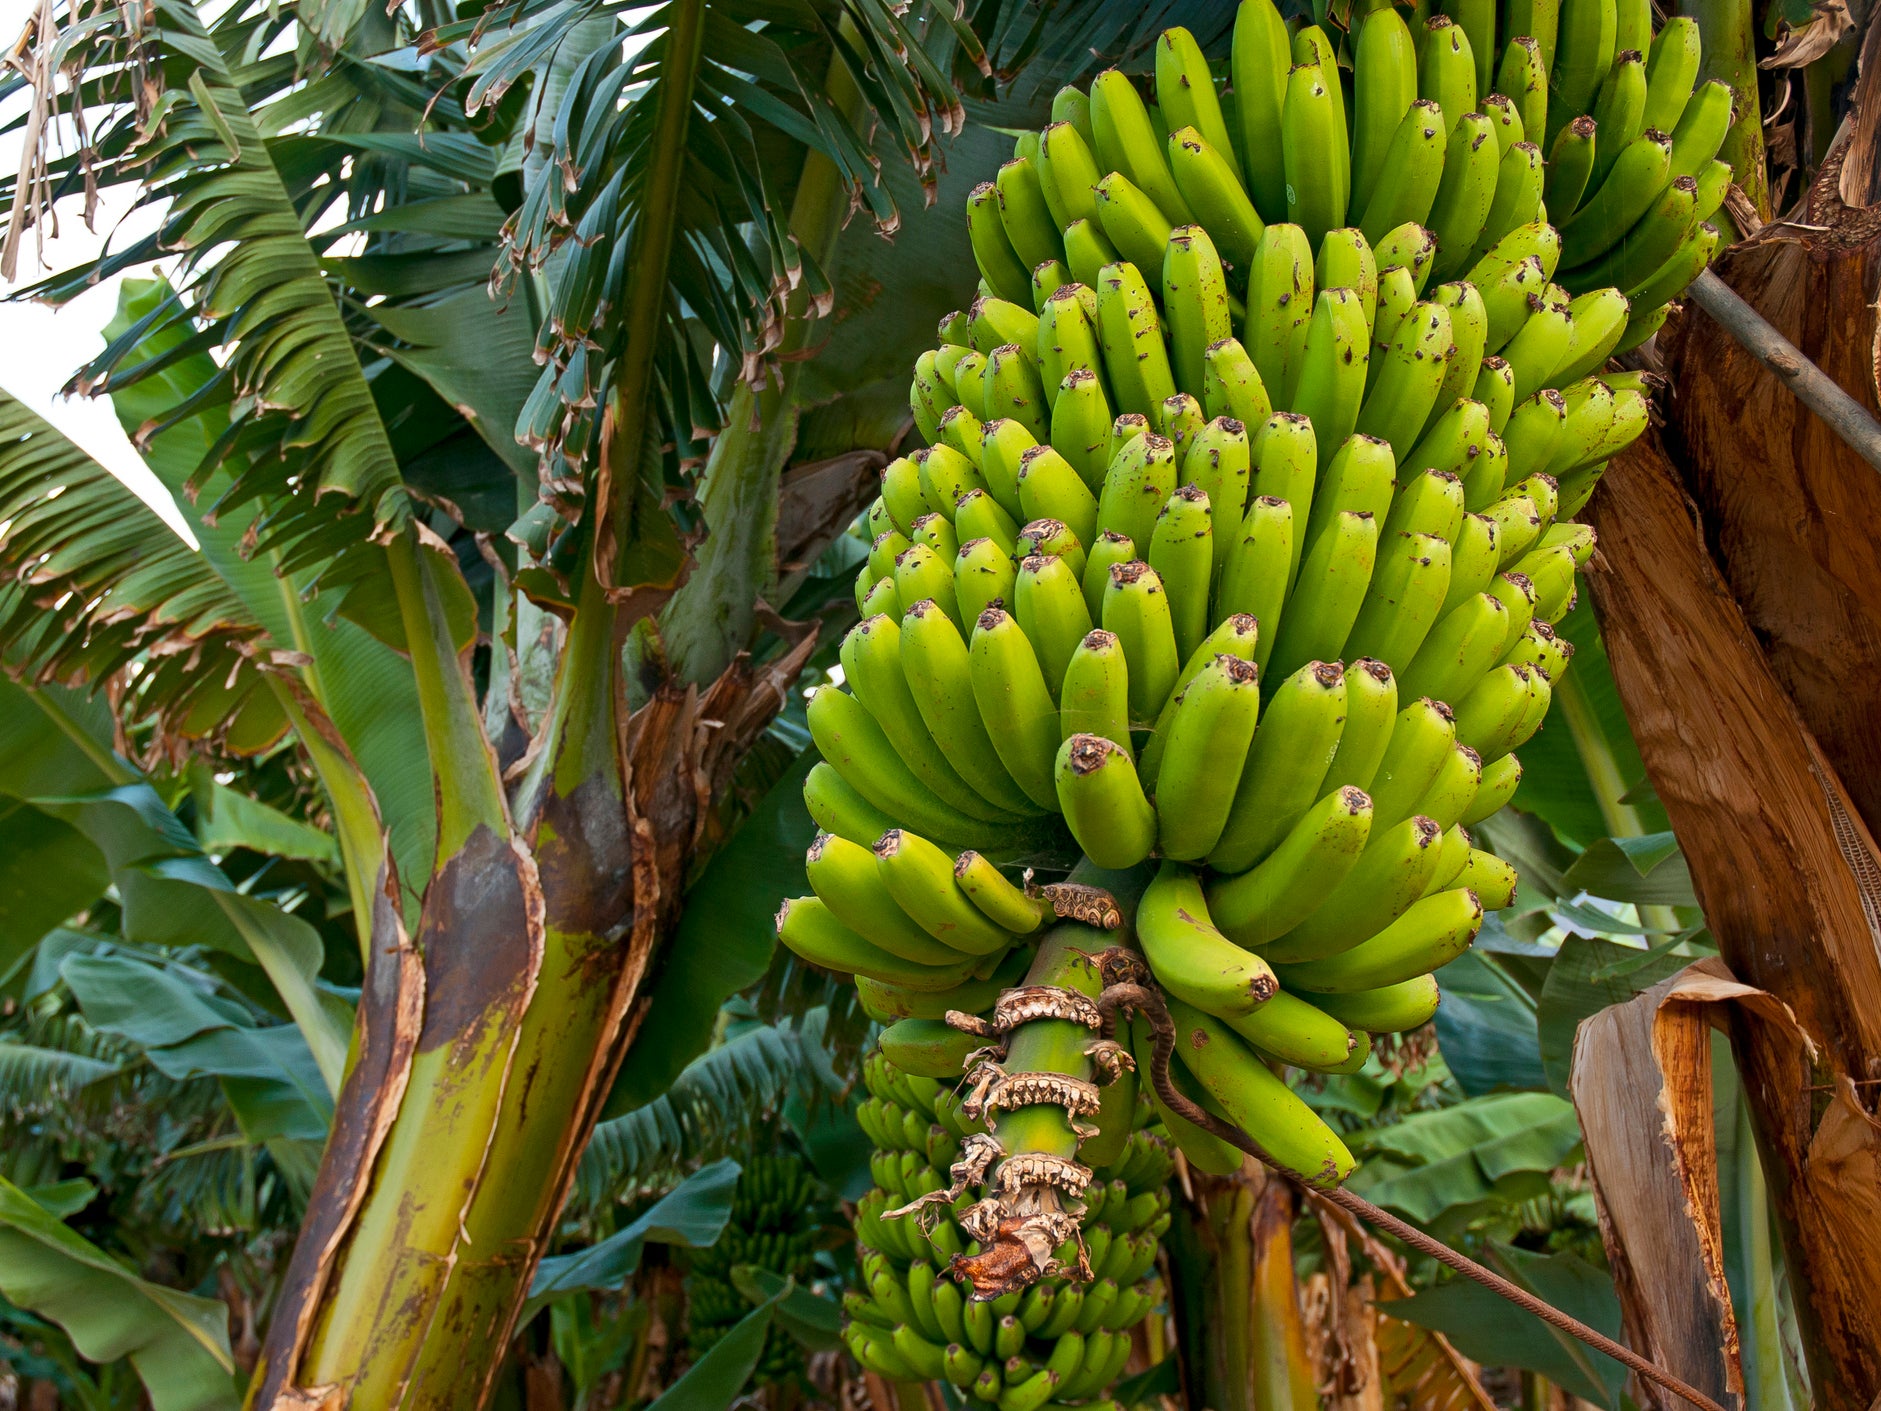 Banana plants were among the domesticated species prehistoric humans brought with them to remote Pacific islands over 3,000 years ago